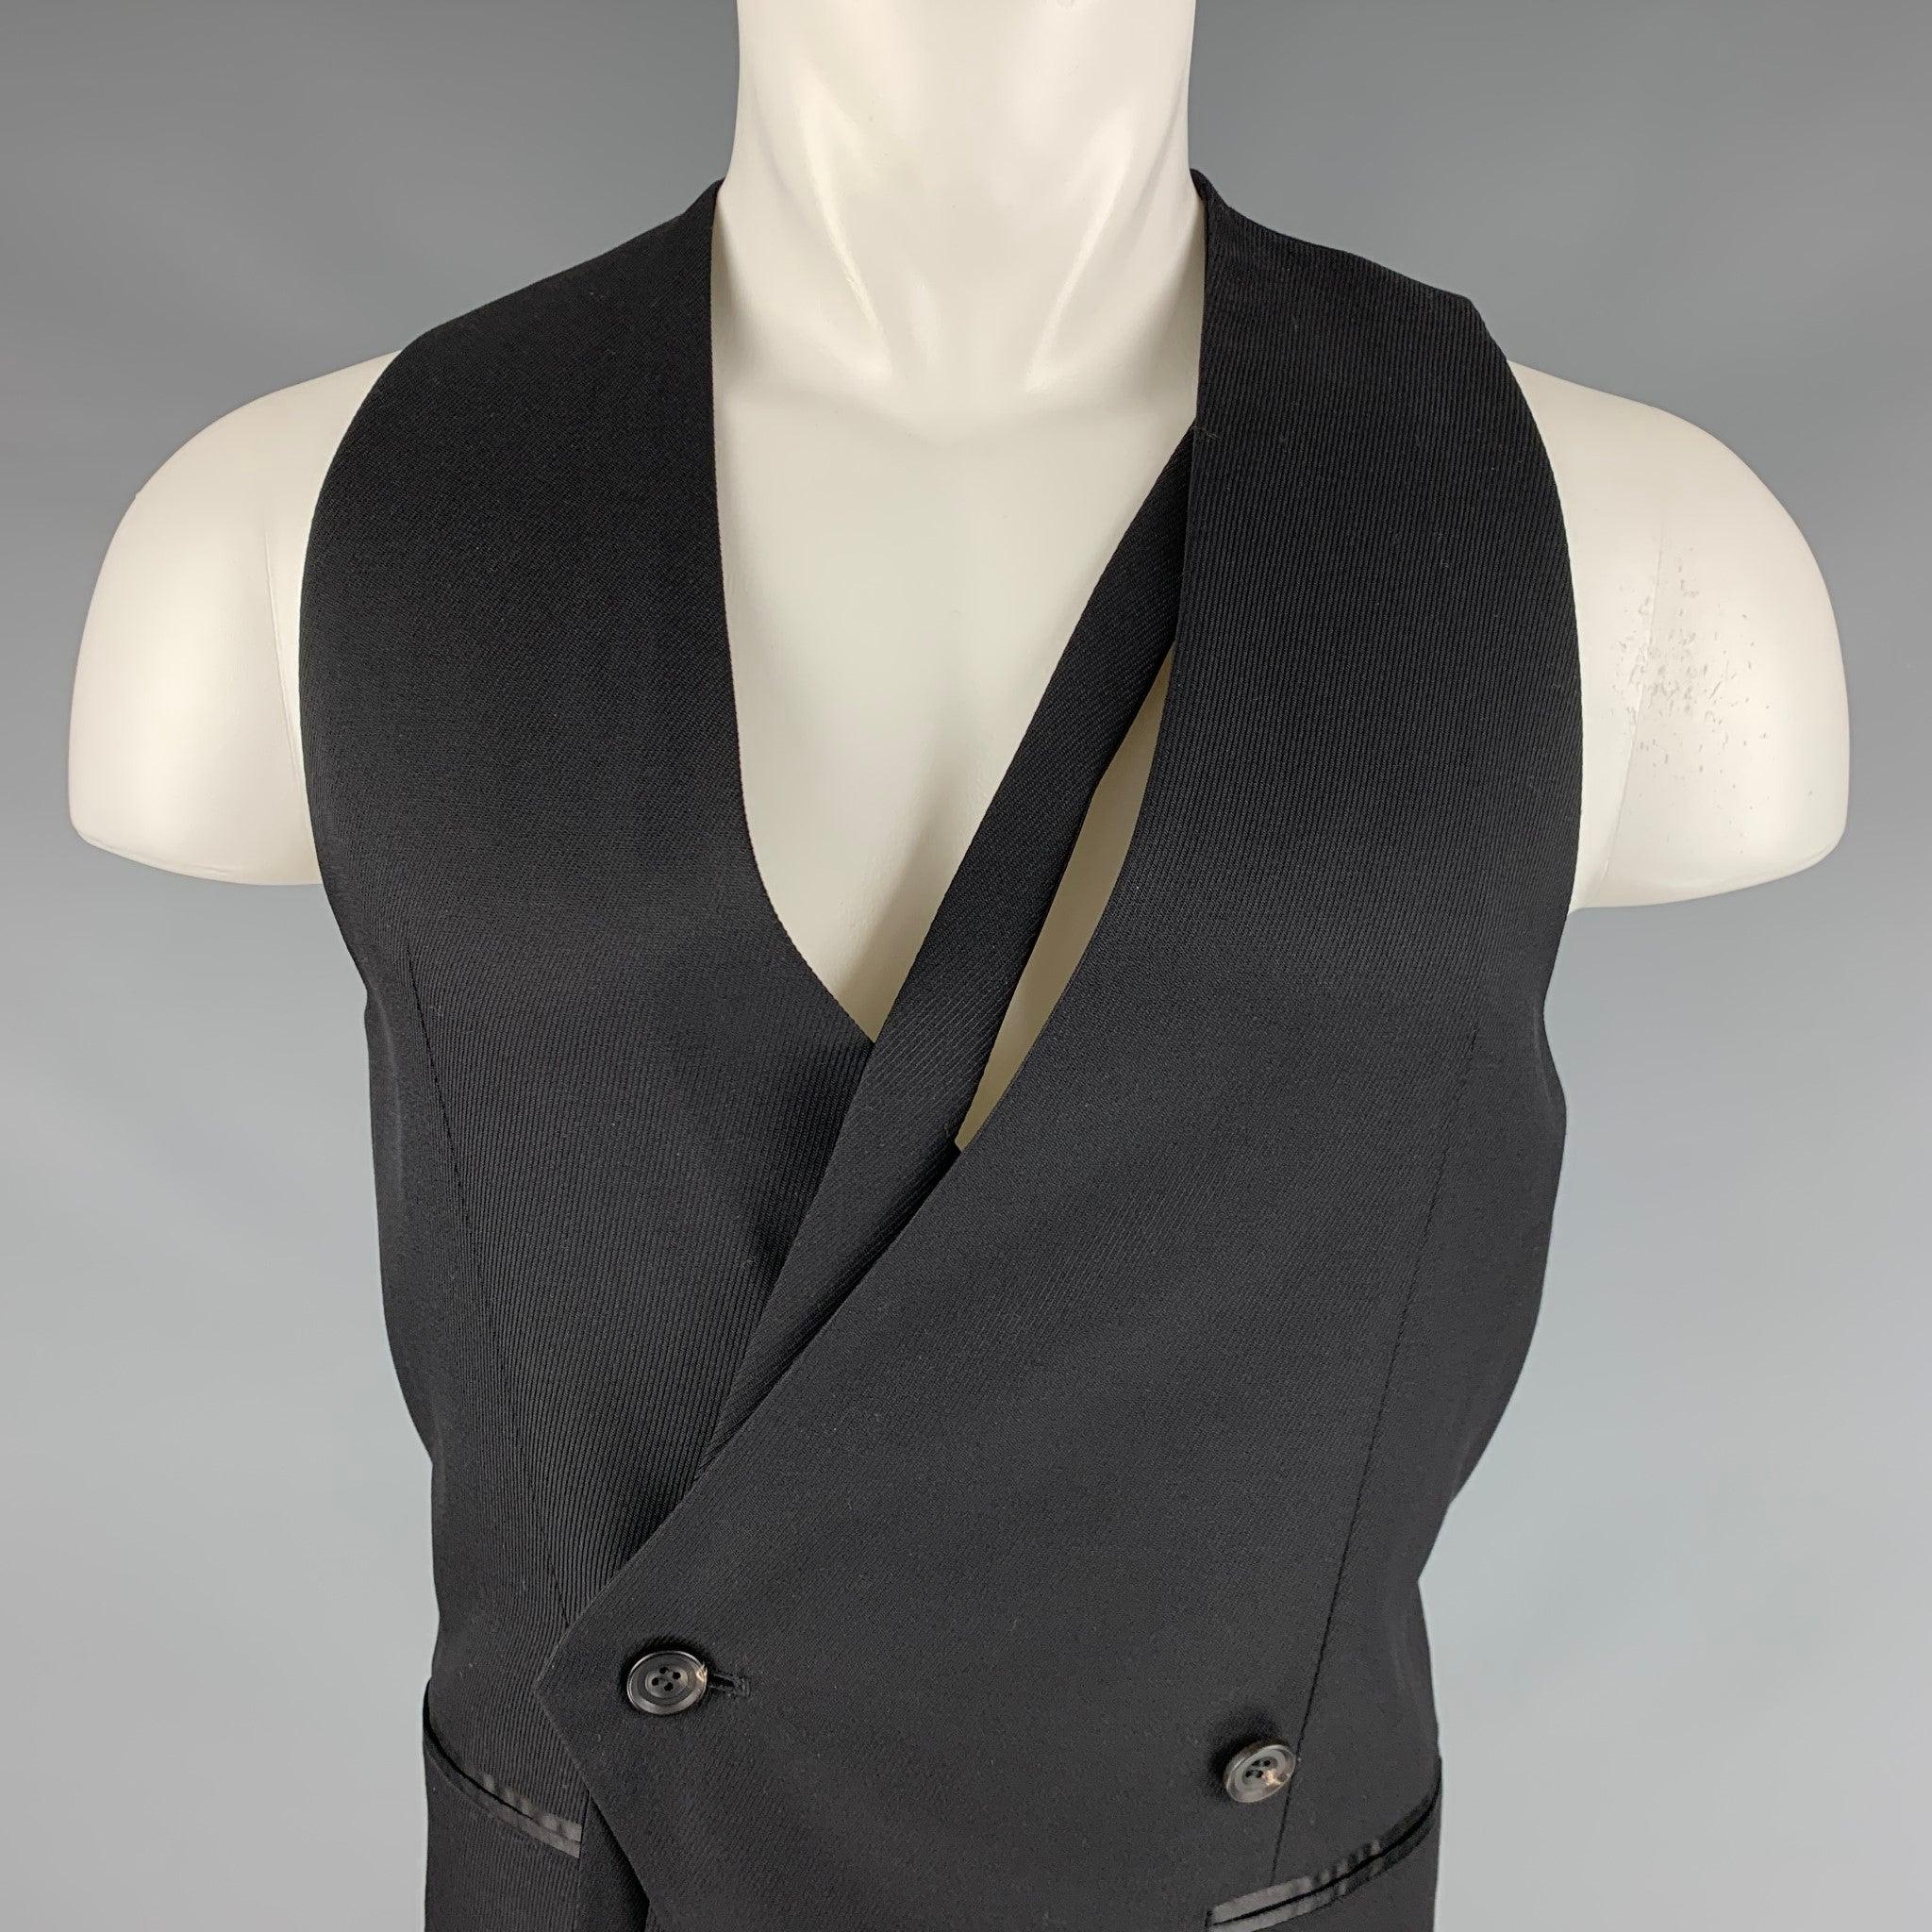 ATO vest
in a black wool silk blend fabric featuring a double breasted style, versatile belt, and two small pockets. Made in Japan.Excellent Pre-Owned Condition. 

Marked:   46 

Measurements: 
 
Shoulder: 11 inches Chest: 36 inches Length: 21